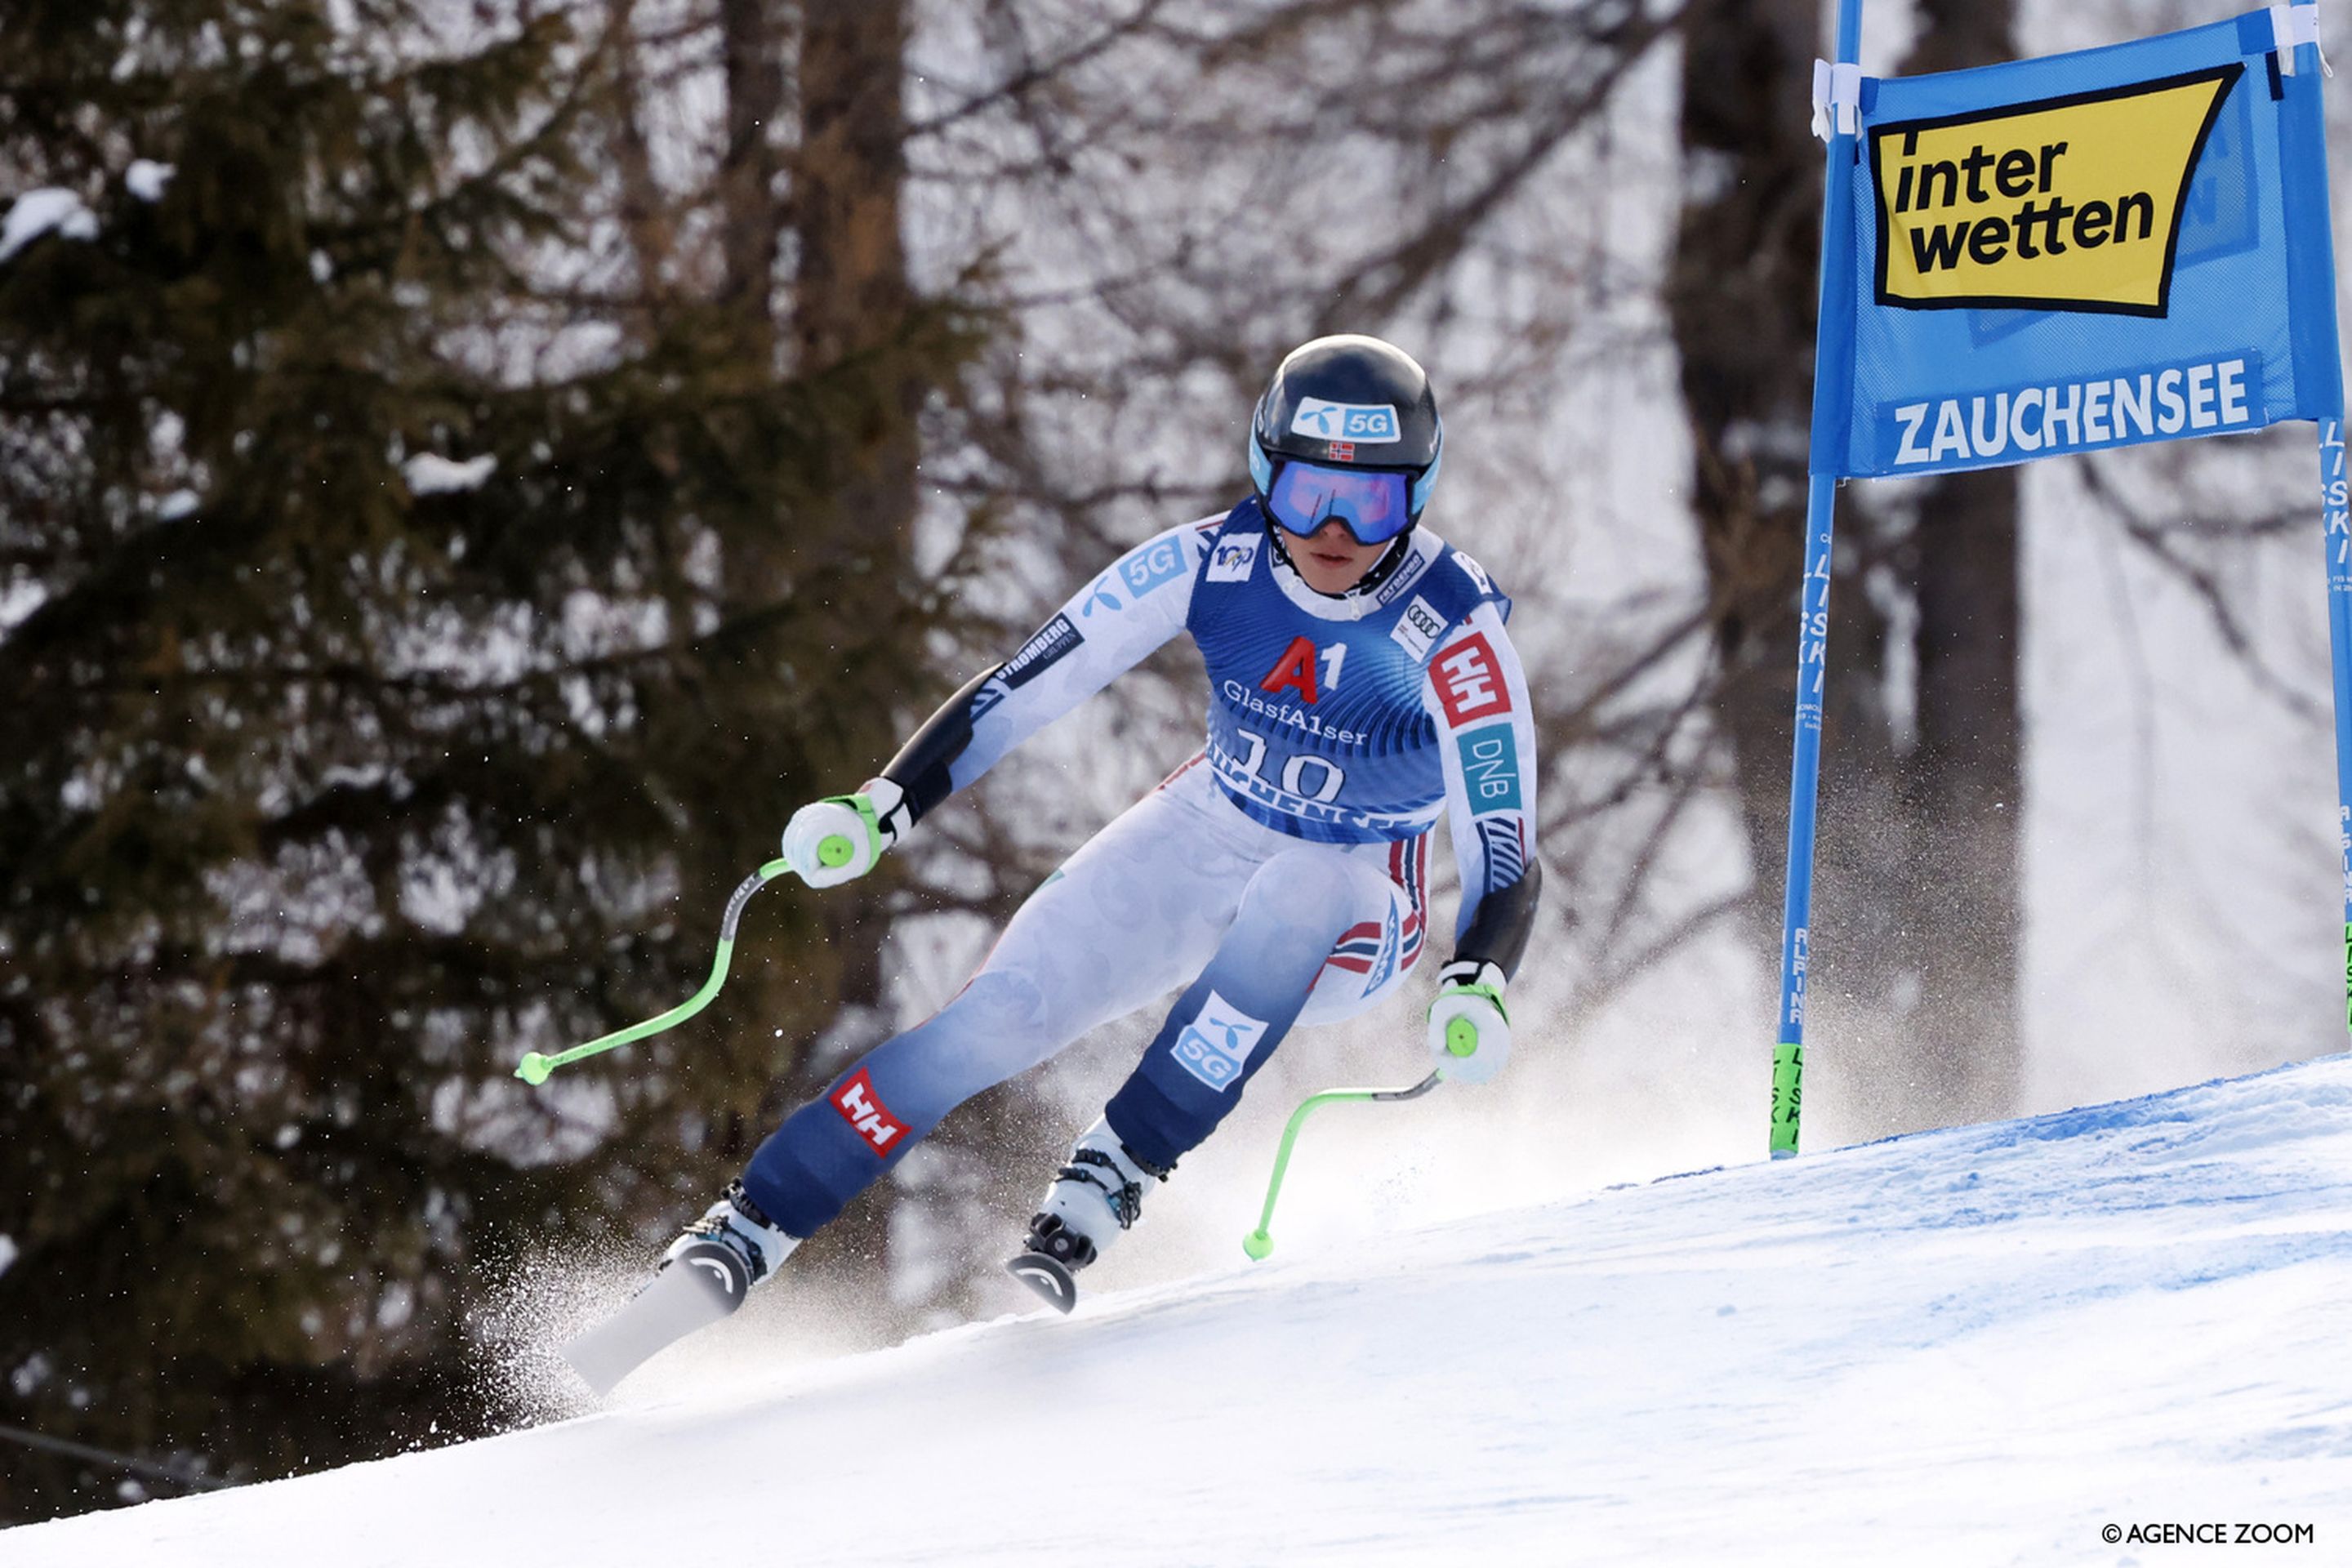 Kajsa Vickhoff Lie (NOR) attacking the course en route to a runner-up finish (Agence Zoom)